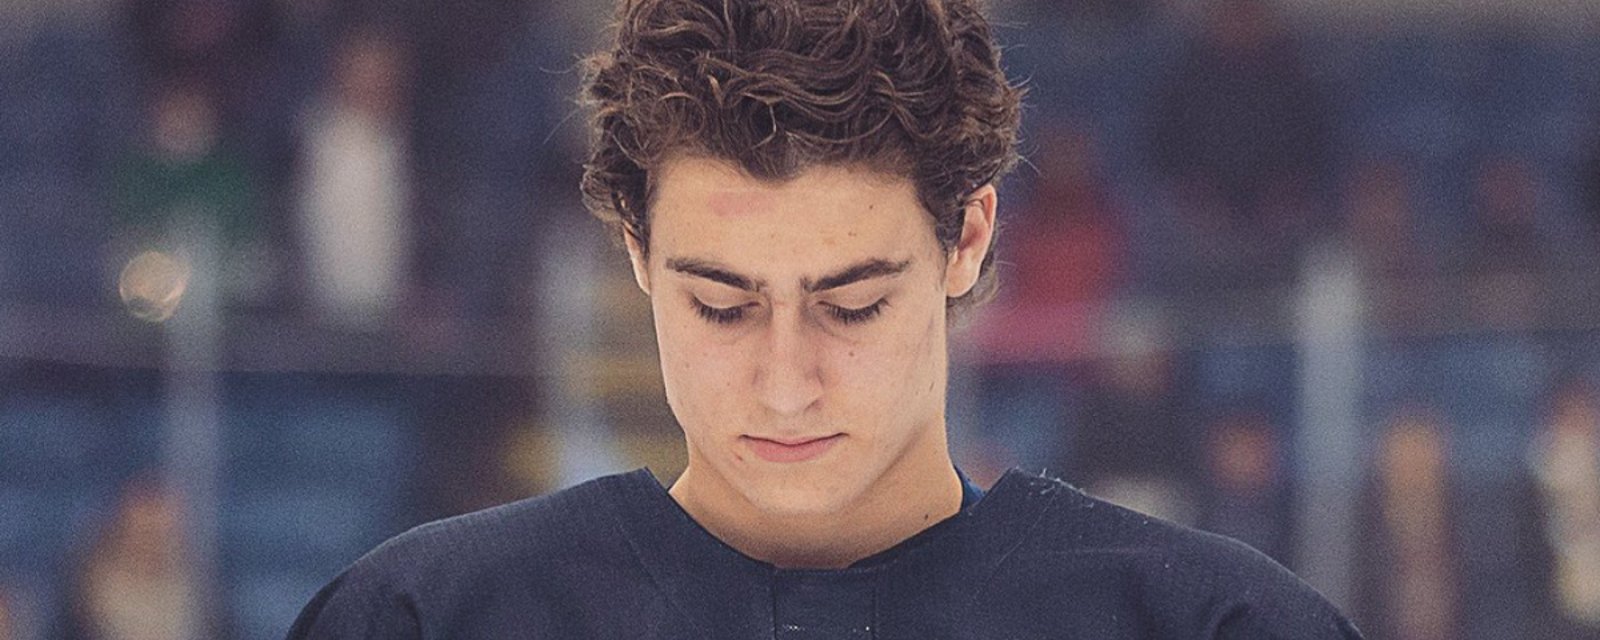 NHL prospect Luke Tuch has reportedly made his decision.